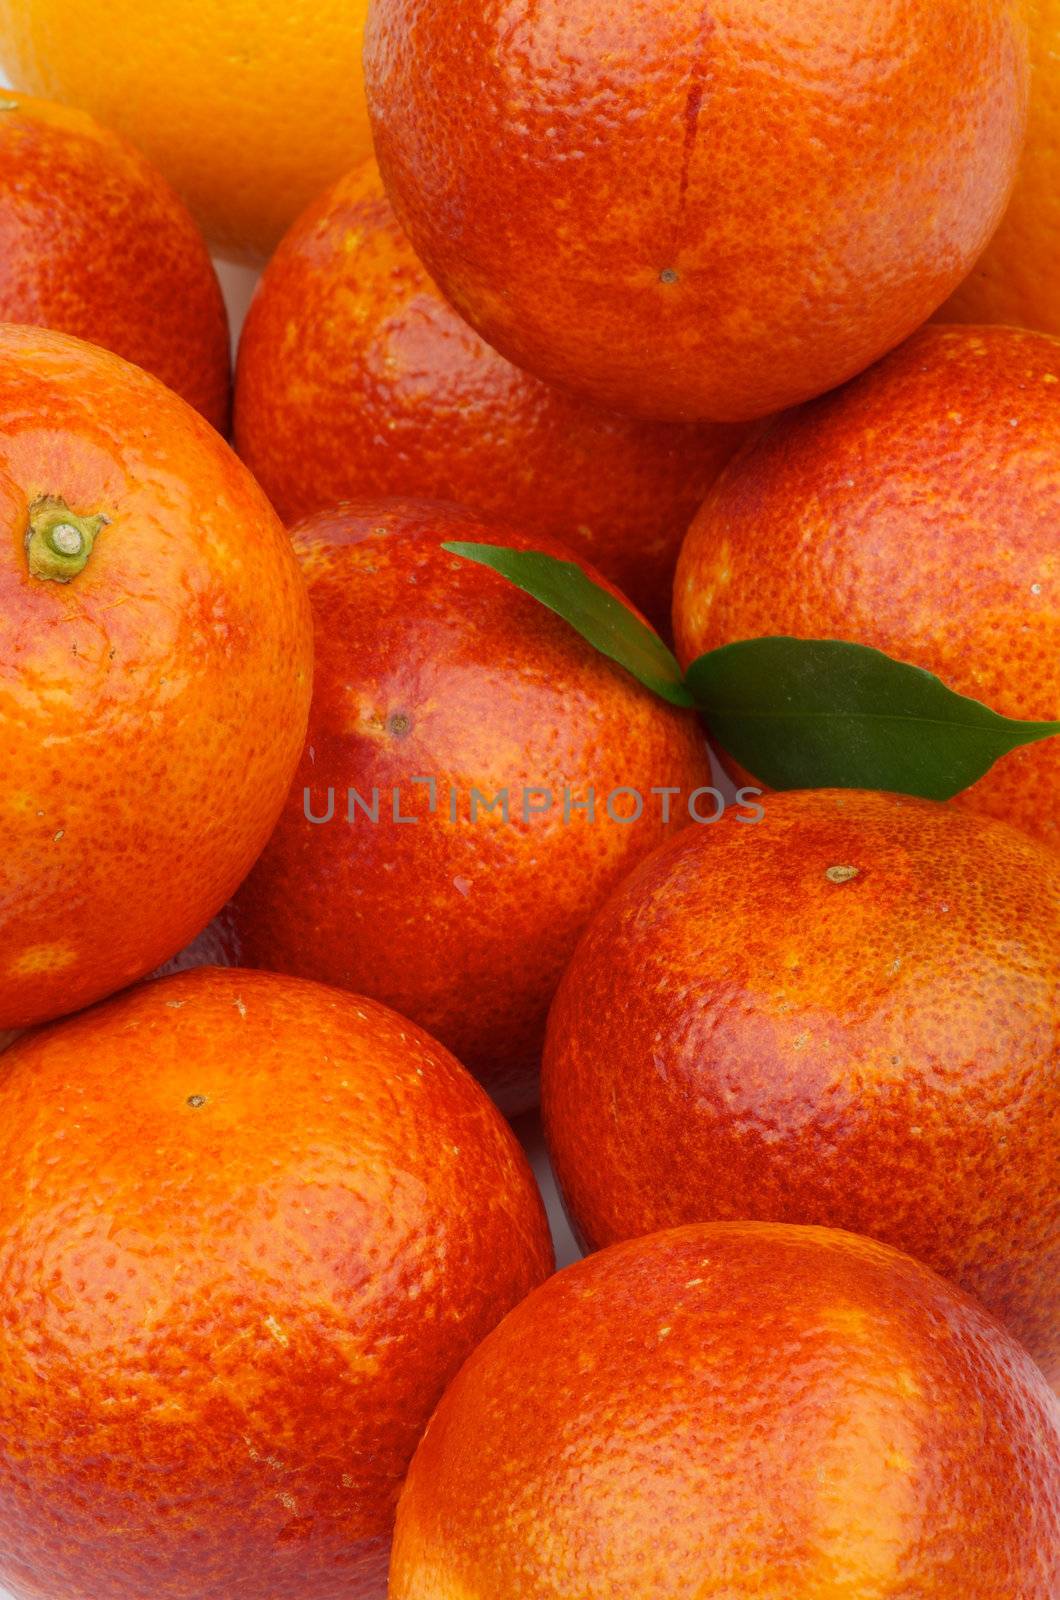 Background of Perfect Blood Oranges with Green Leafs closeup